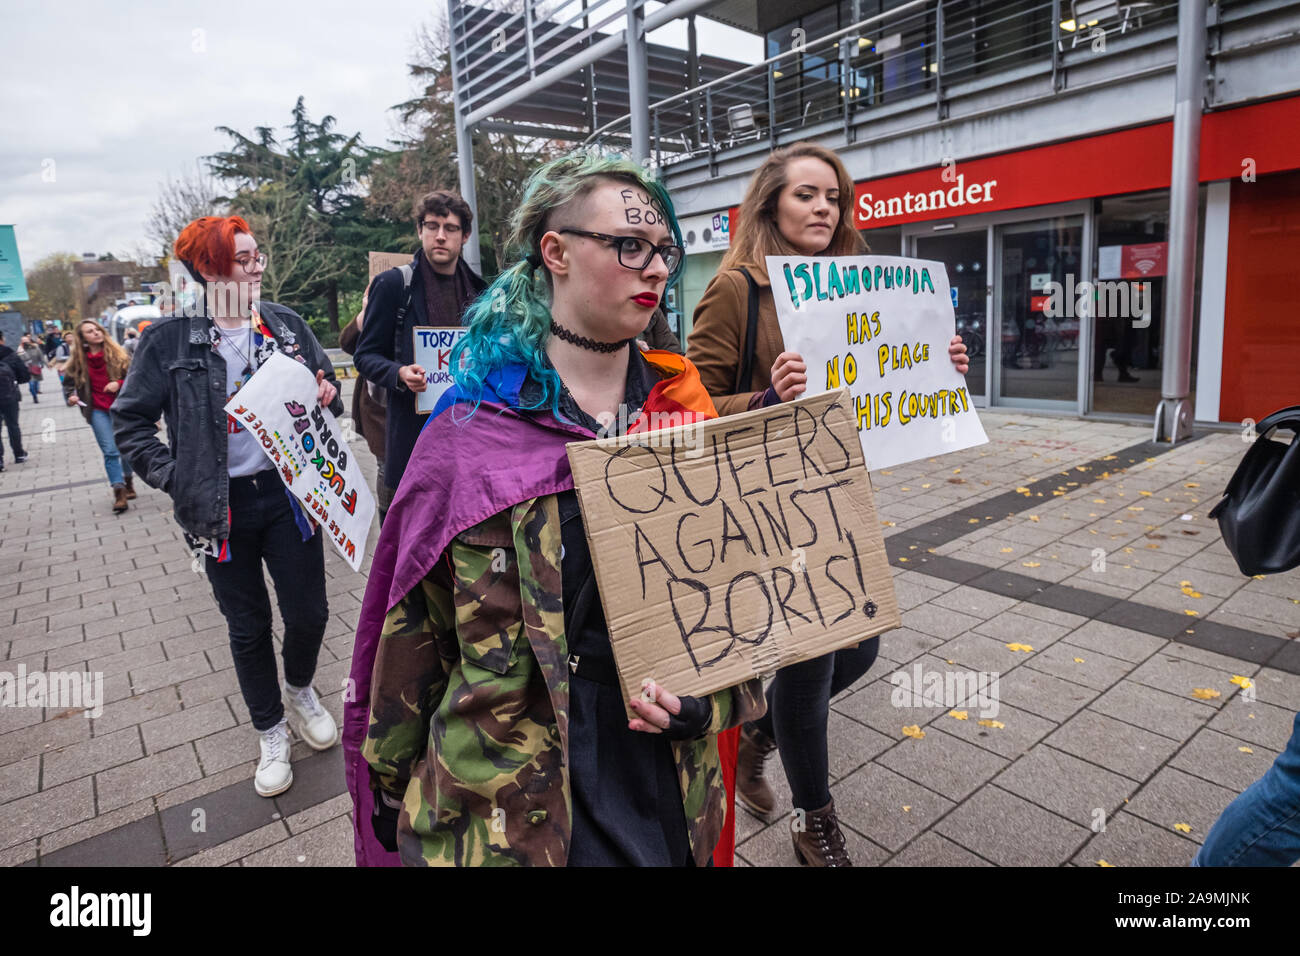 London, UK. 16th November 2019. A protest holds a poster 'Queers Against Boris!' as protesters from FCKBoris urge  everyone at Brunel University in Uxbridge to register and vote against Boris Johnson and kick him out for his racist, elitist politics.  Johnson had a majority of just over 5 thousand in 2017 and Labour candidate Ali Milani has strong hopes of beating him and the other 10 candidates. Peter Marshall/Alamy Live News Stock Photo